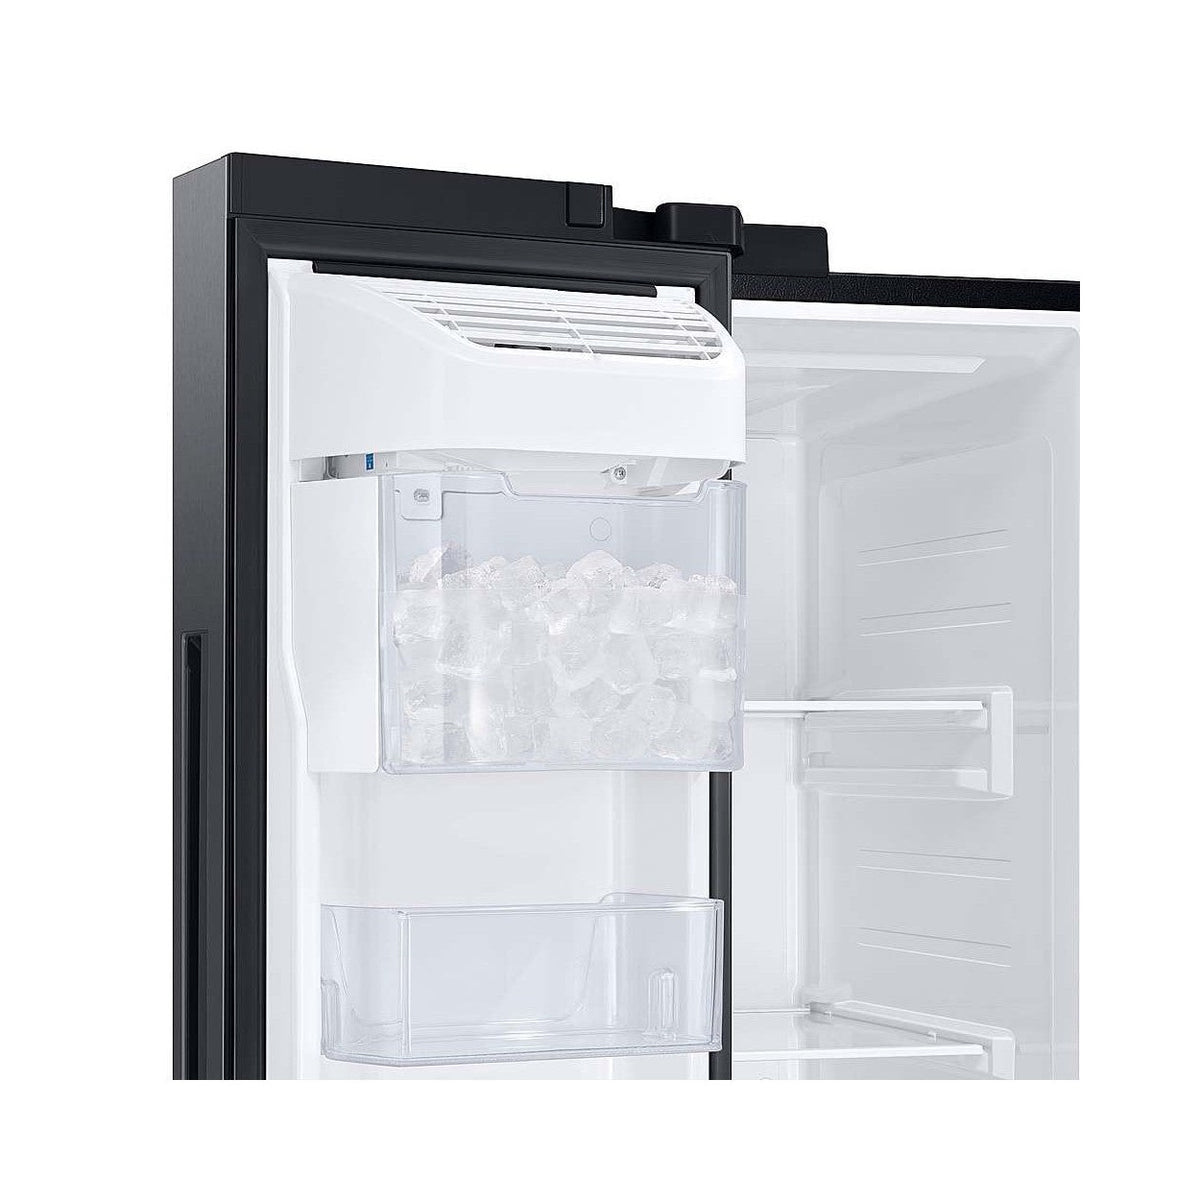 SAMSUNG RS23A500ASG/AA 23 cu. ft. Smart Counter Depth Side-by-Side Refrigerator